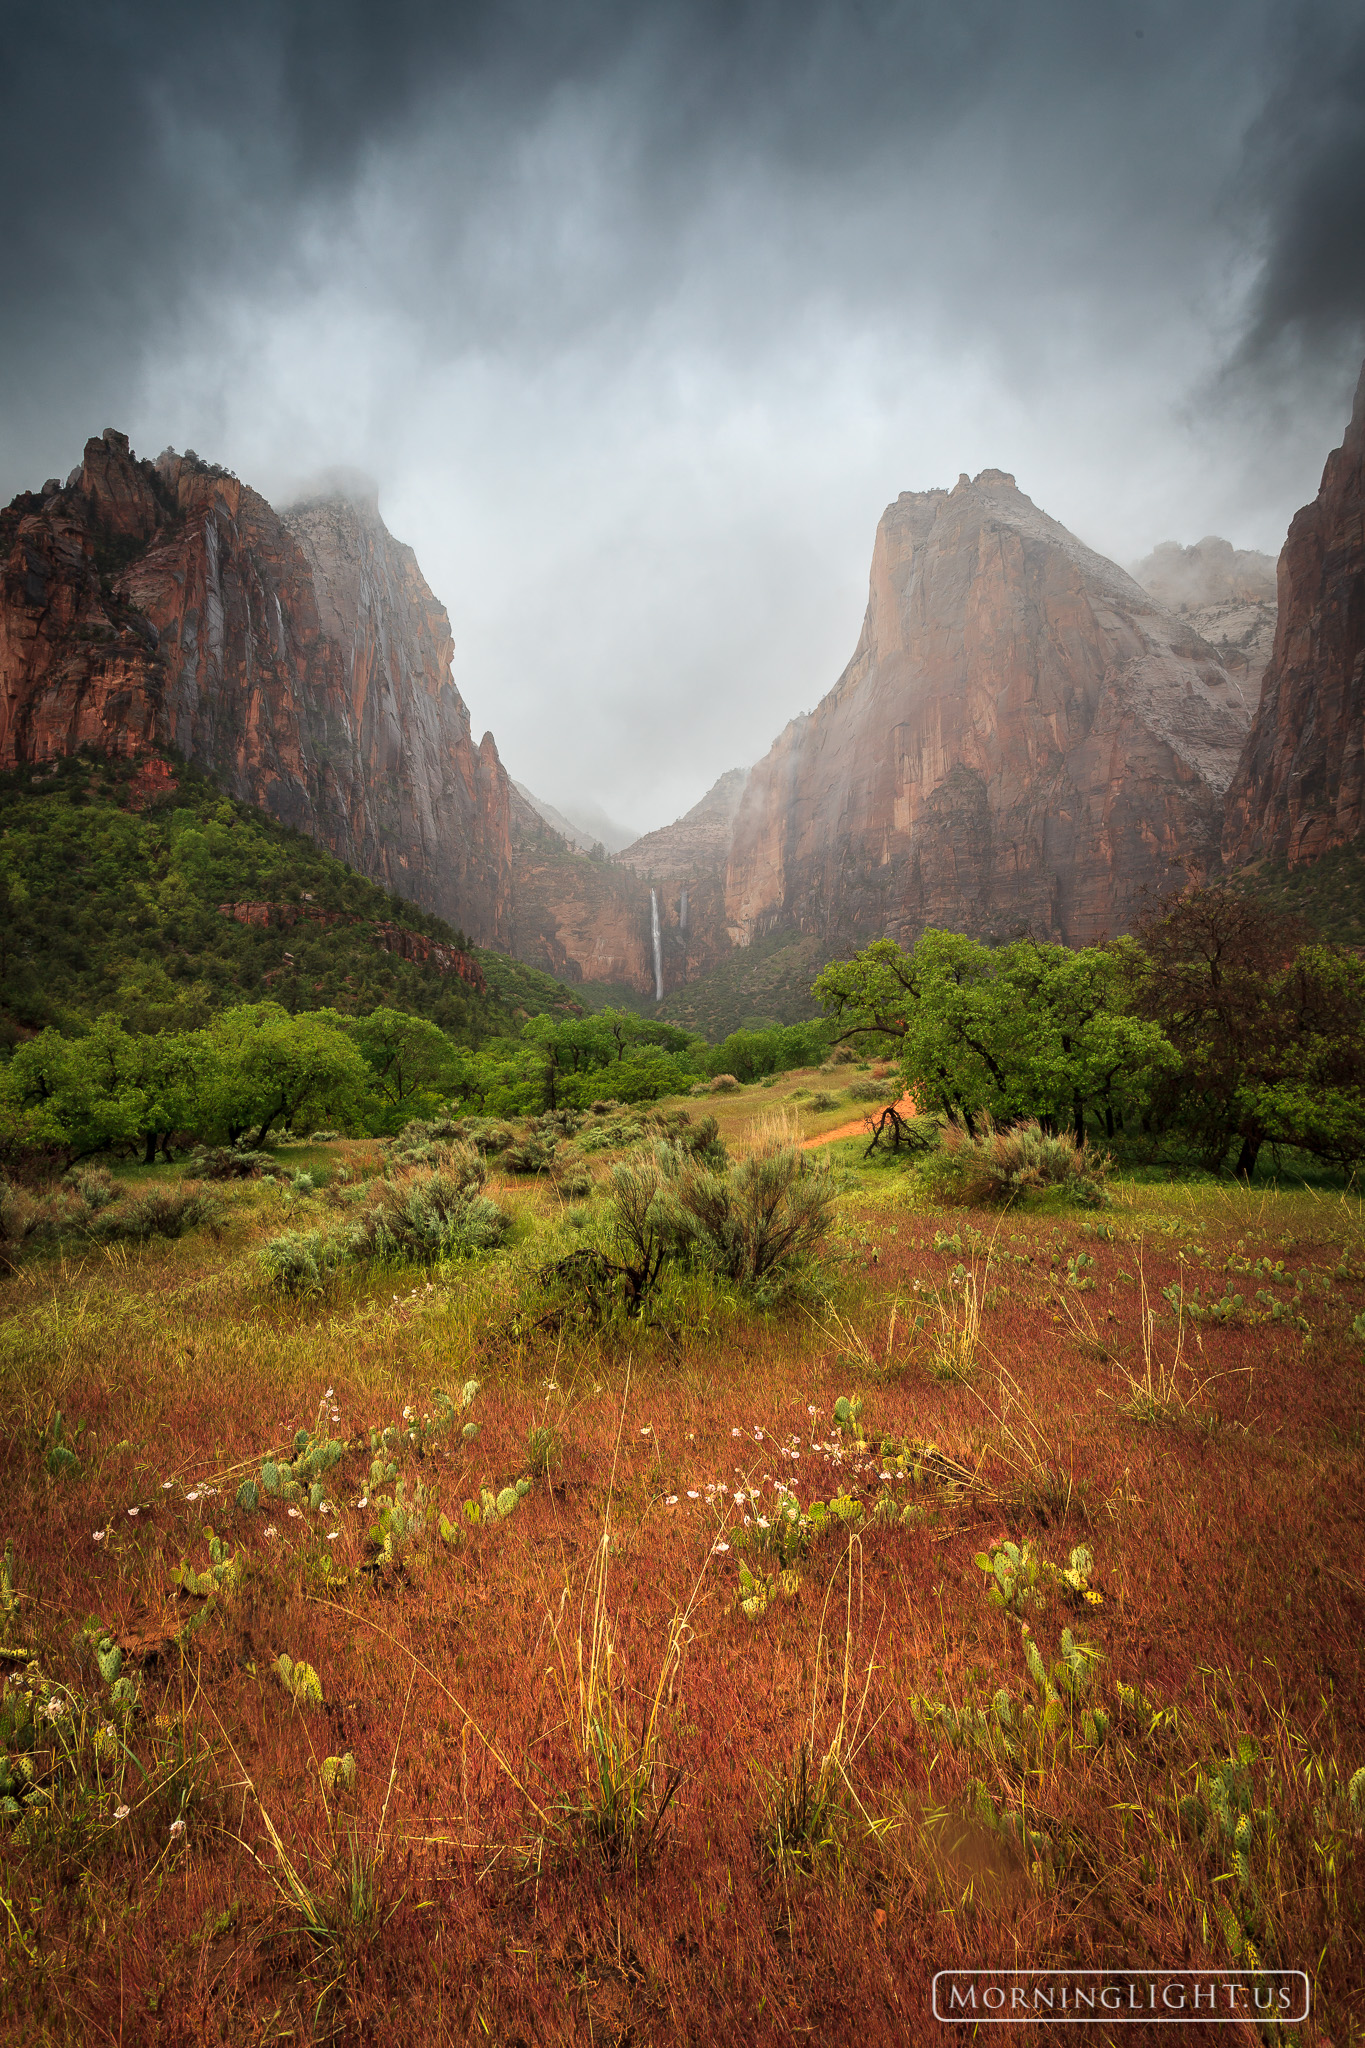 I was fortunate enough to be in Zion during a spring storm. This is a very special time as the clouds hang over the dramatic...